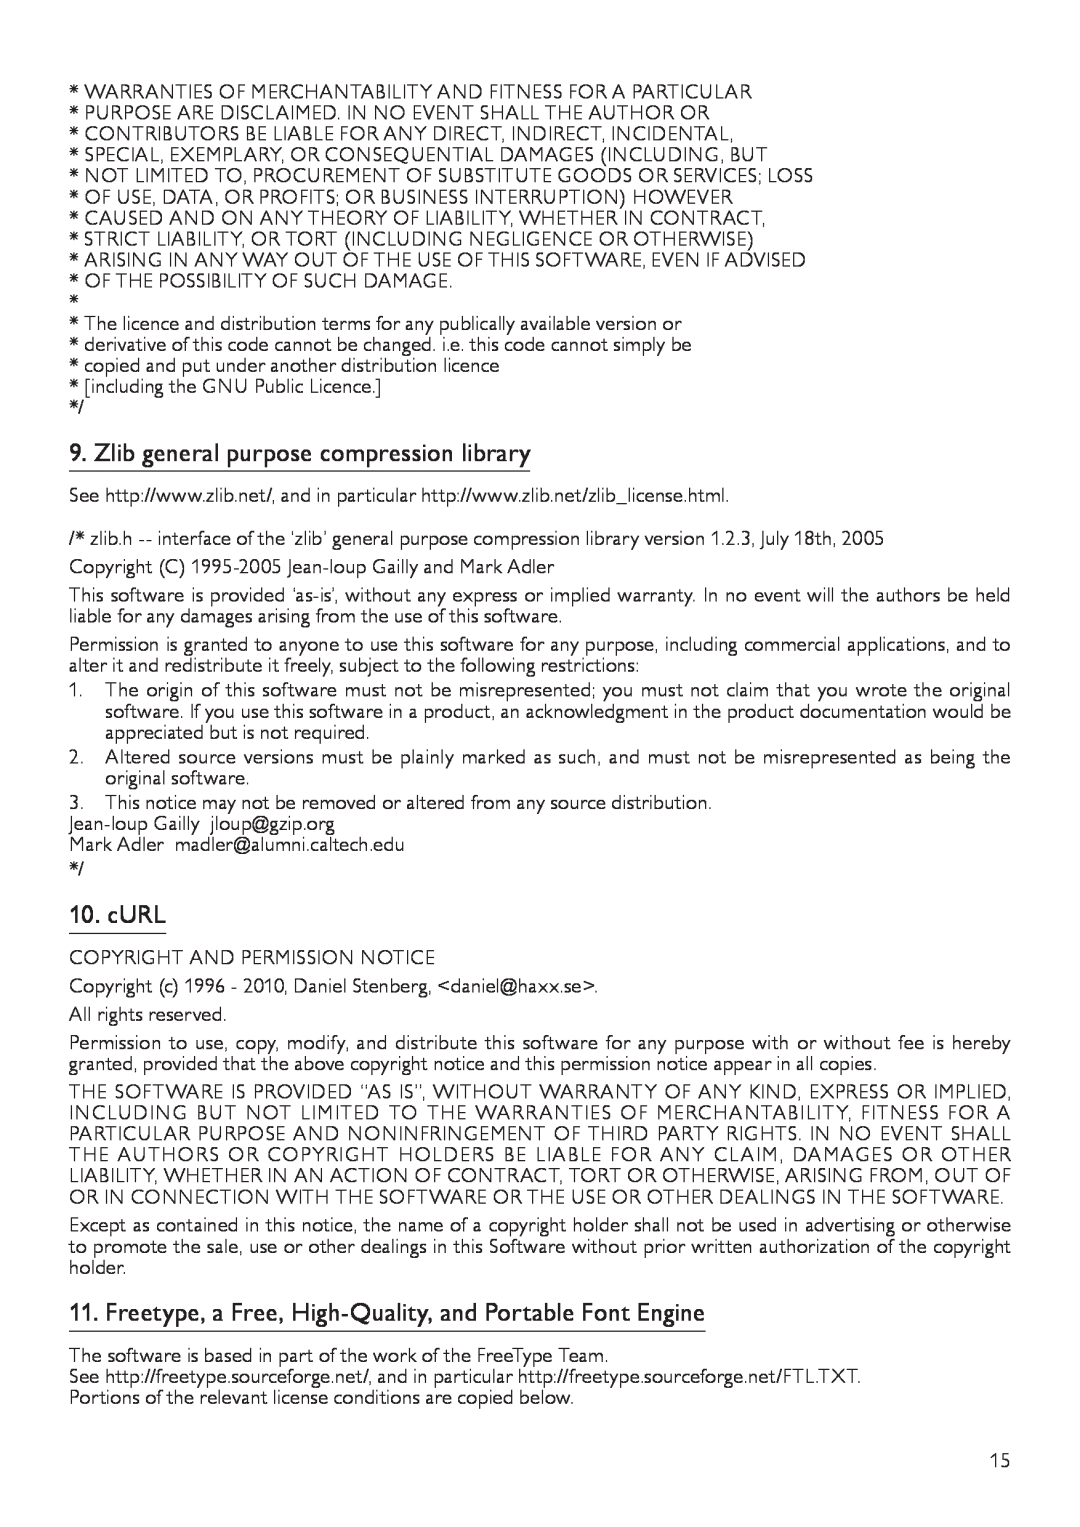 Philips BDP5200 Zlib general purpose compression library, cURL, Freetype, a Free, High-Quality, and Portable Font Engine 